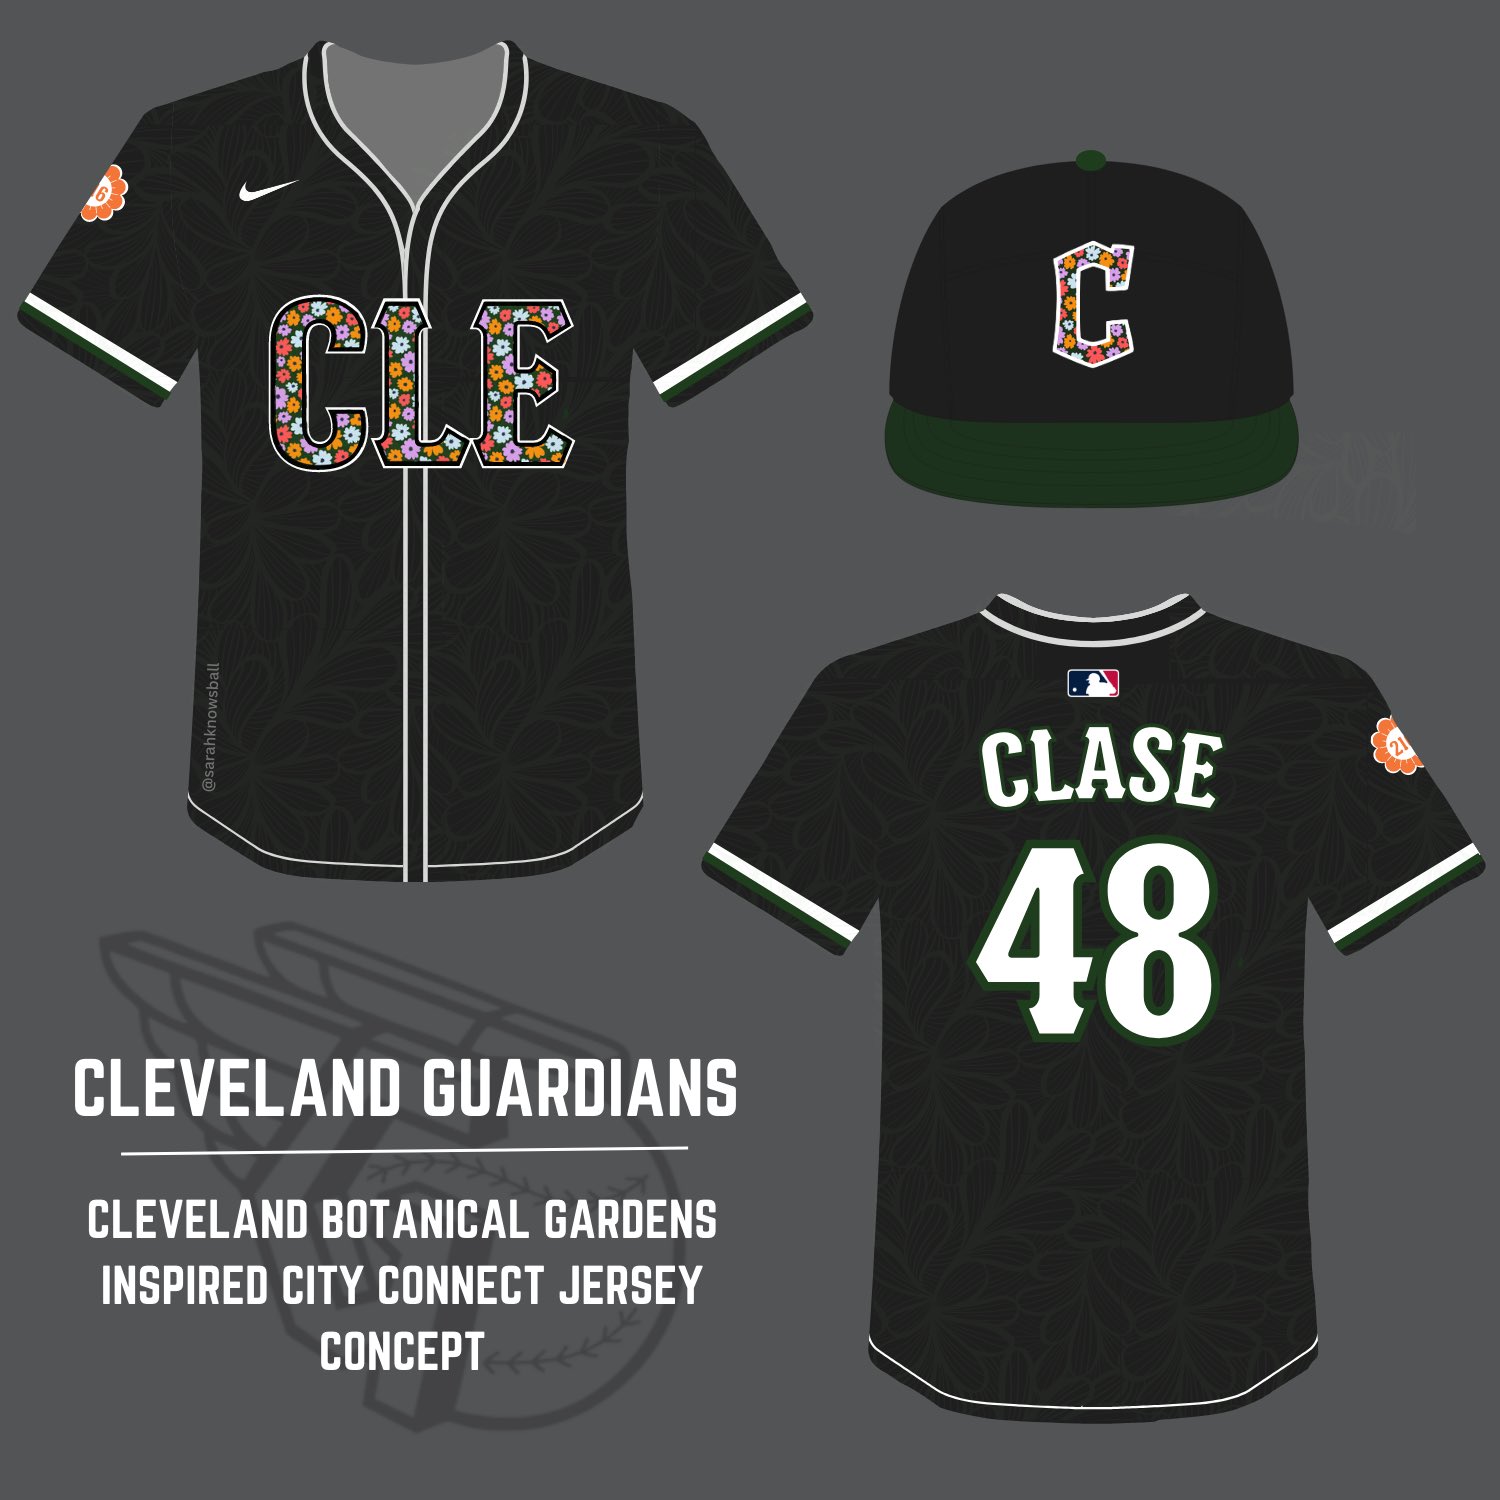 Sarah ⚾️ on X: Cleveland Guardians City Connect jersey concept inspired by  the Cleveland Botanical gardens: Seasonal & colorful flowers, '216'  jersey patch, and subtle floral design to pair with a deep